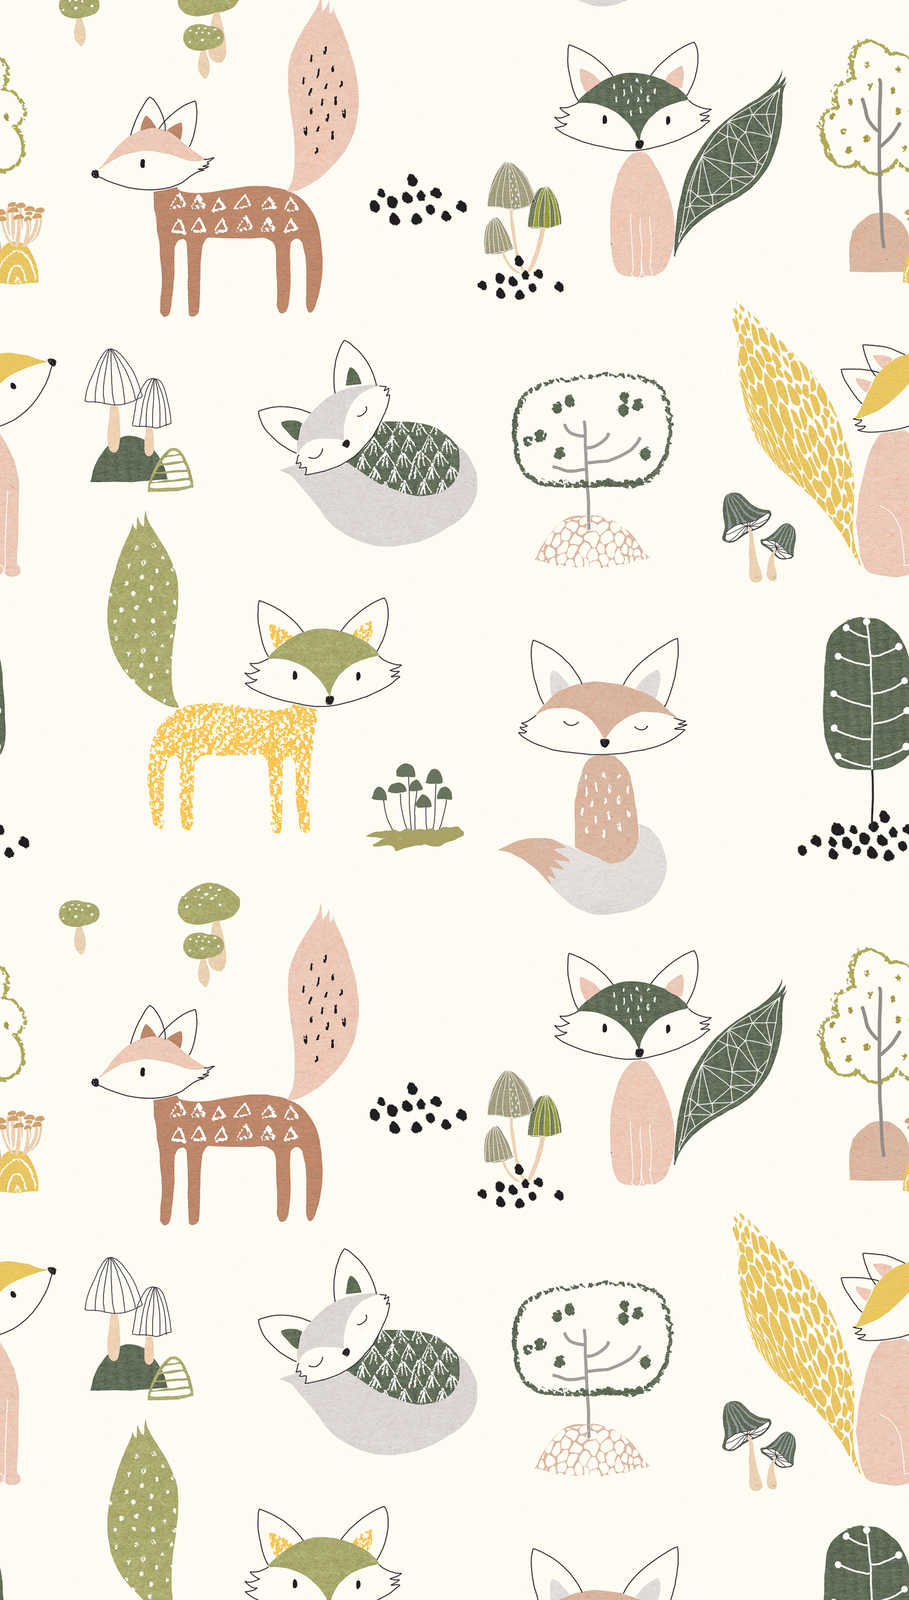             wallpaper child motif with foxes and mushrooms - coloured, cream, green
        